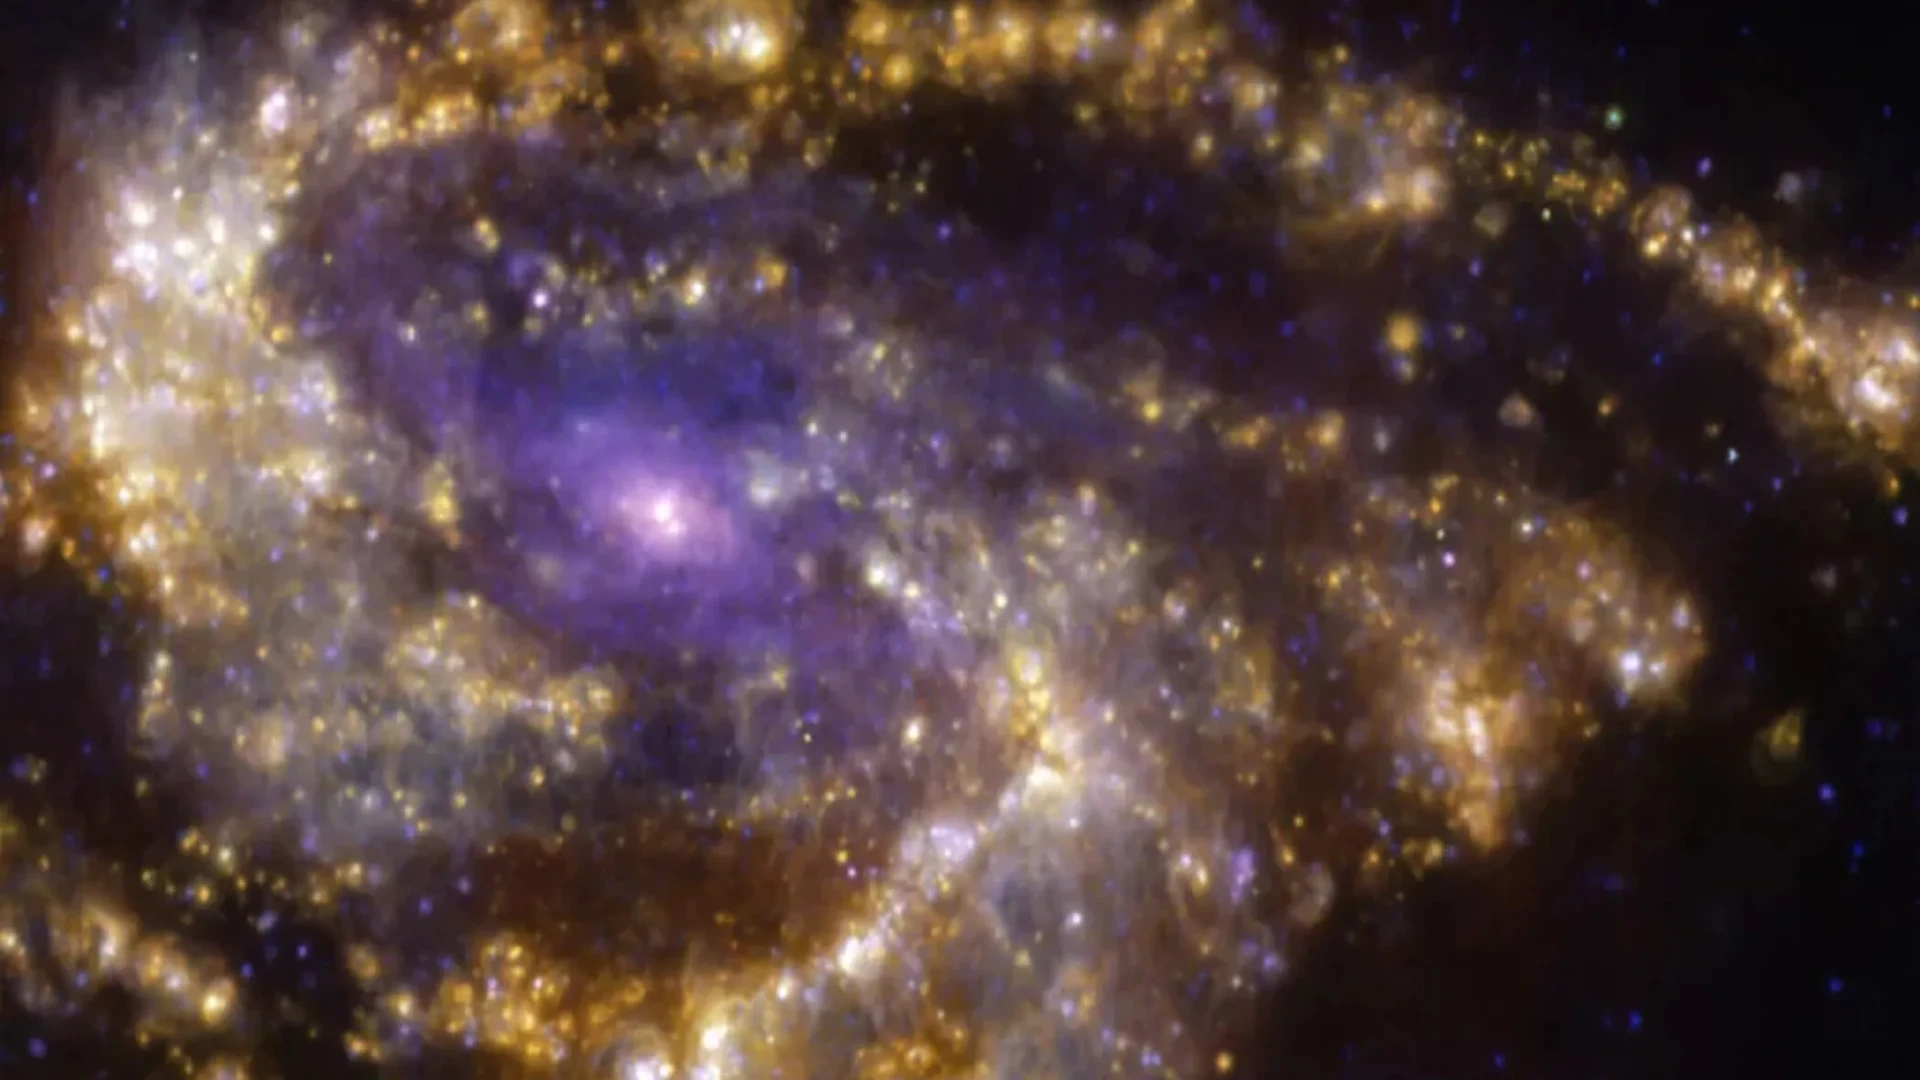 ESO Shares A Colourful Image Of NGC 3627 Galaxy Which Radiates Golden And Purple Gas